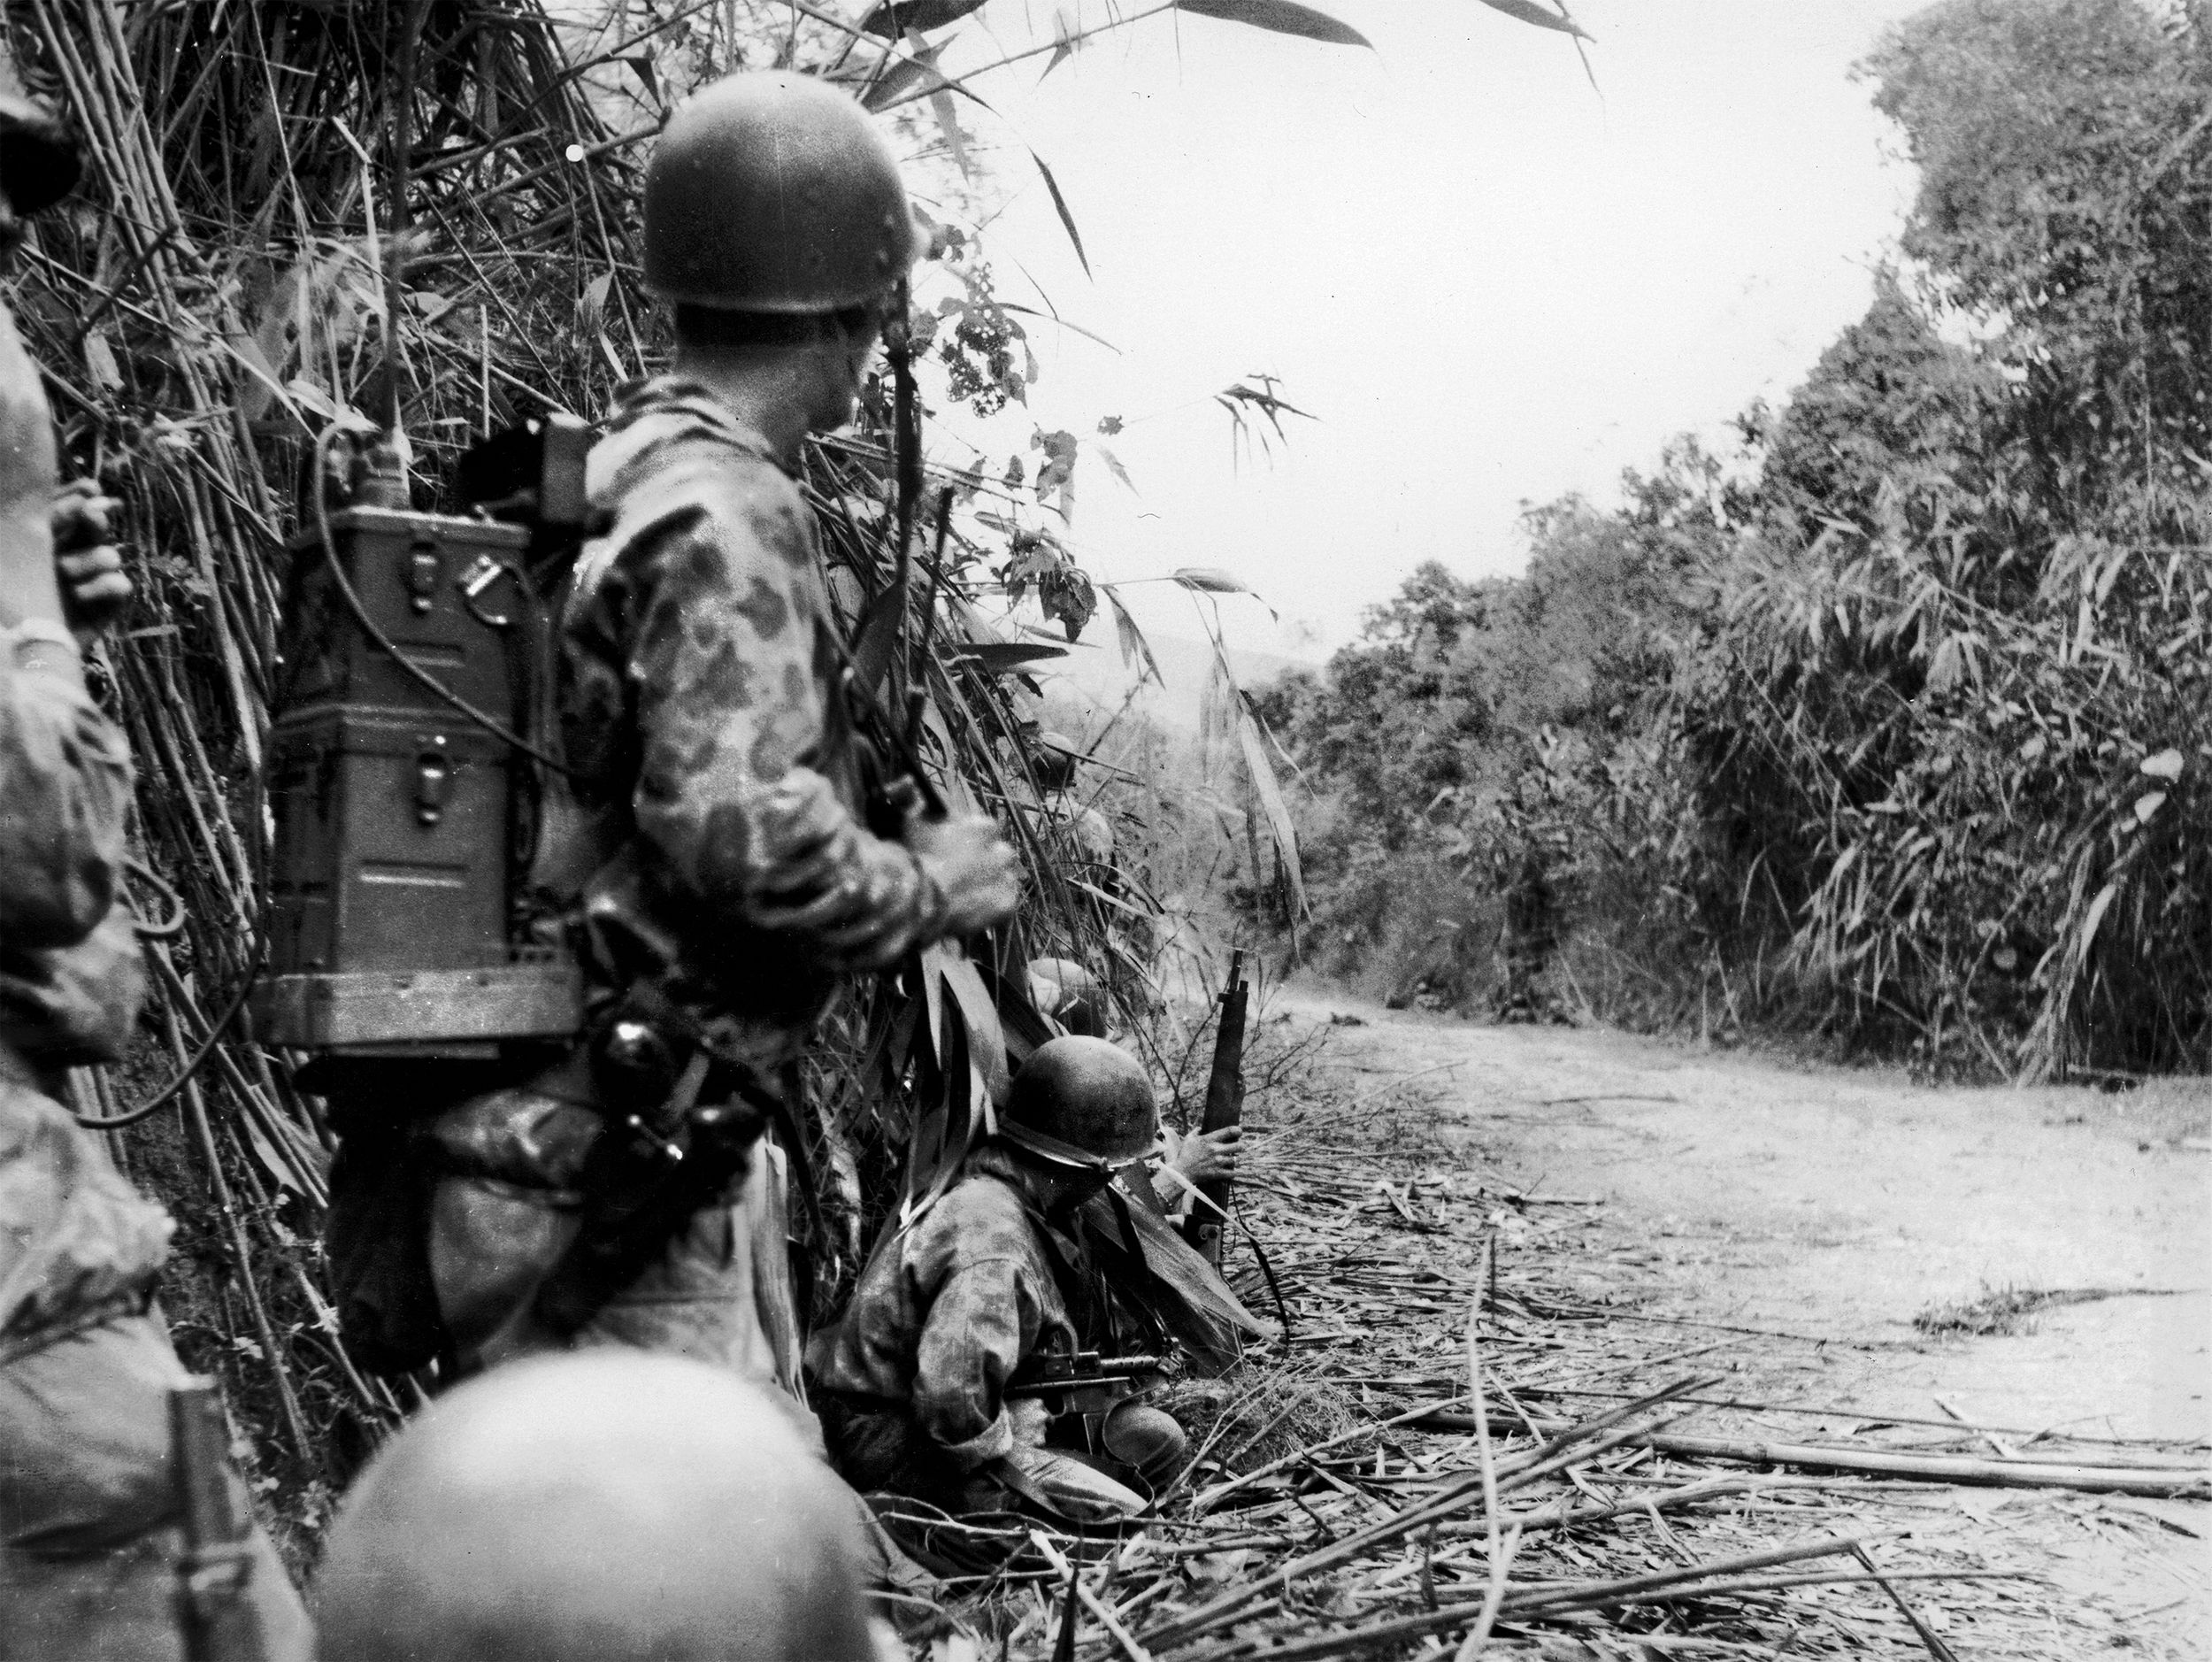 French paratroopers search for the source of Viet Minh gunfire. Forced to travel on the limited road system, the French were often ambushed by Viet Minh moving through the jungle.